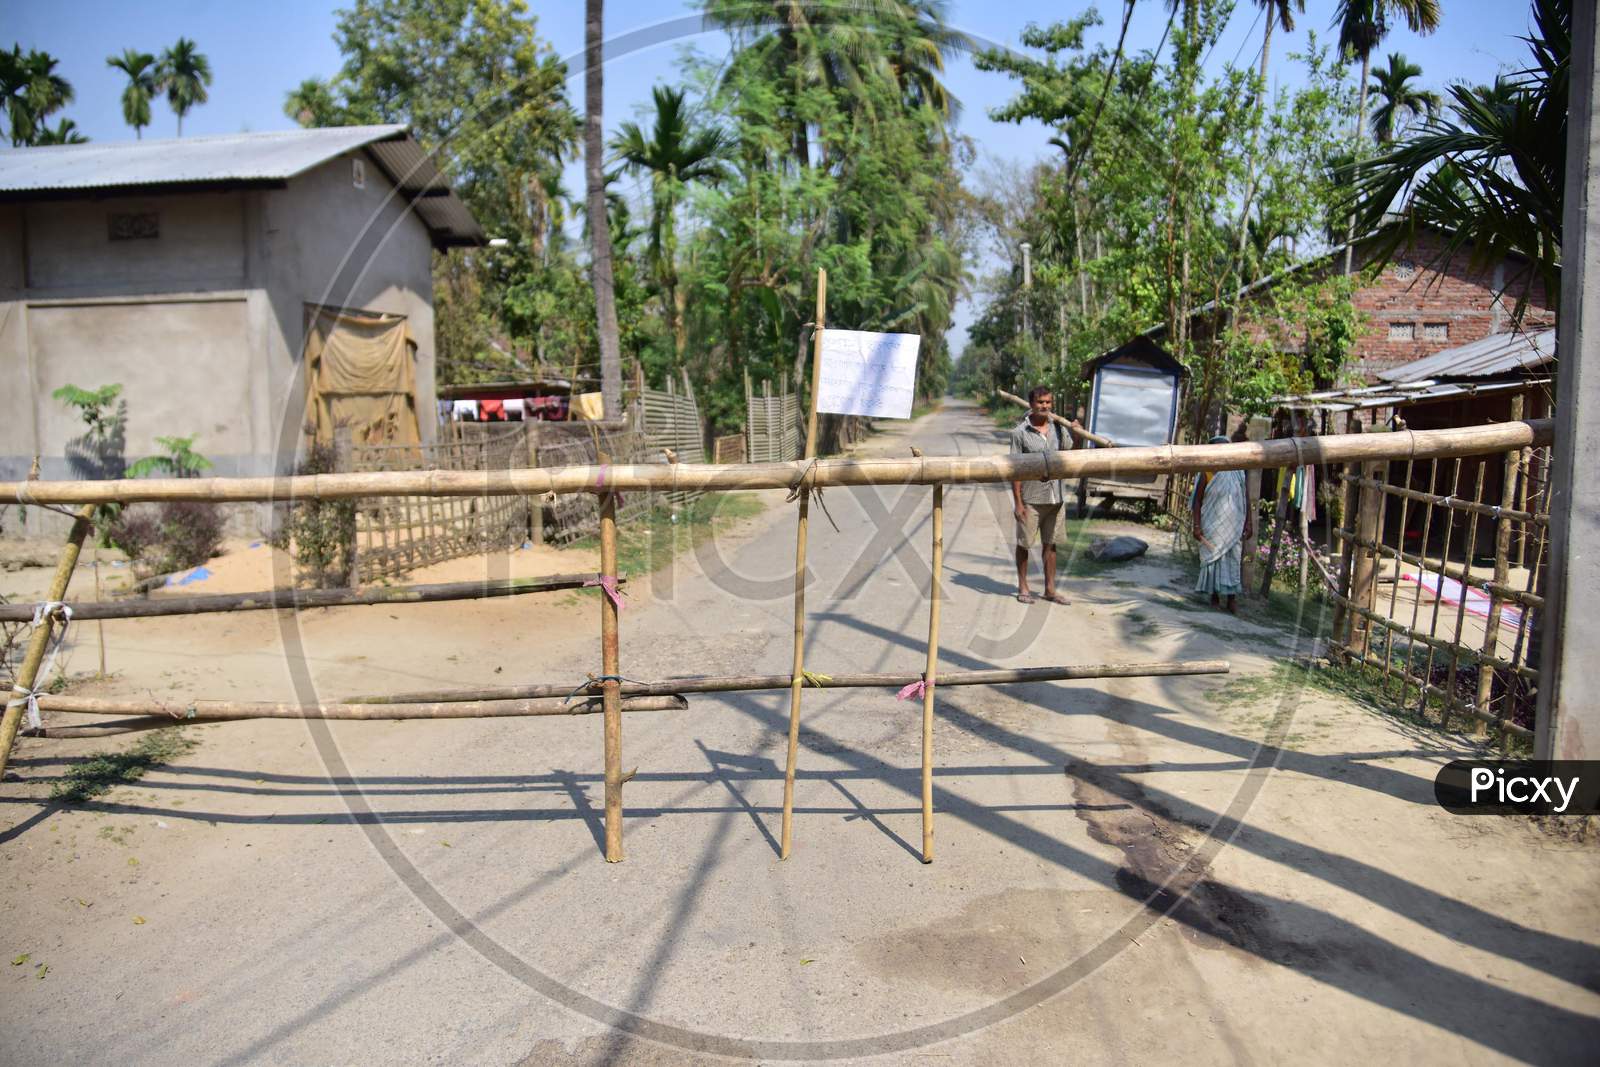 A Bamboo Laid Across A Road By Residents During A 21-Day Nationwide Lockdown To Limit The Spreading Of Coronavirus Disease (Covid-19) At A Village In Nagaon District Of Assam,India